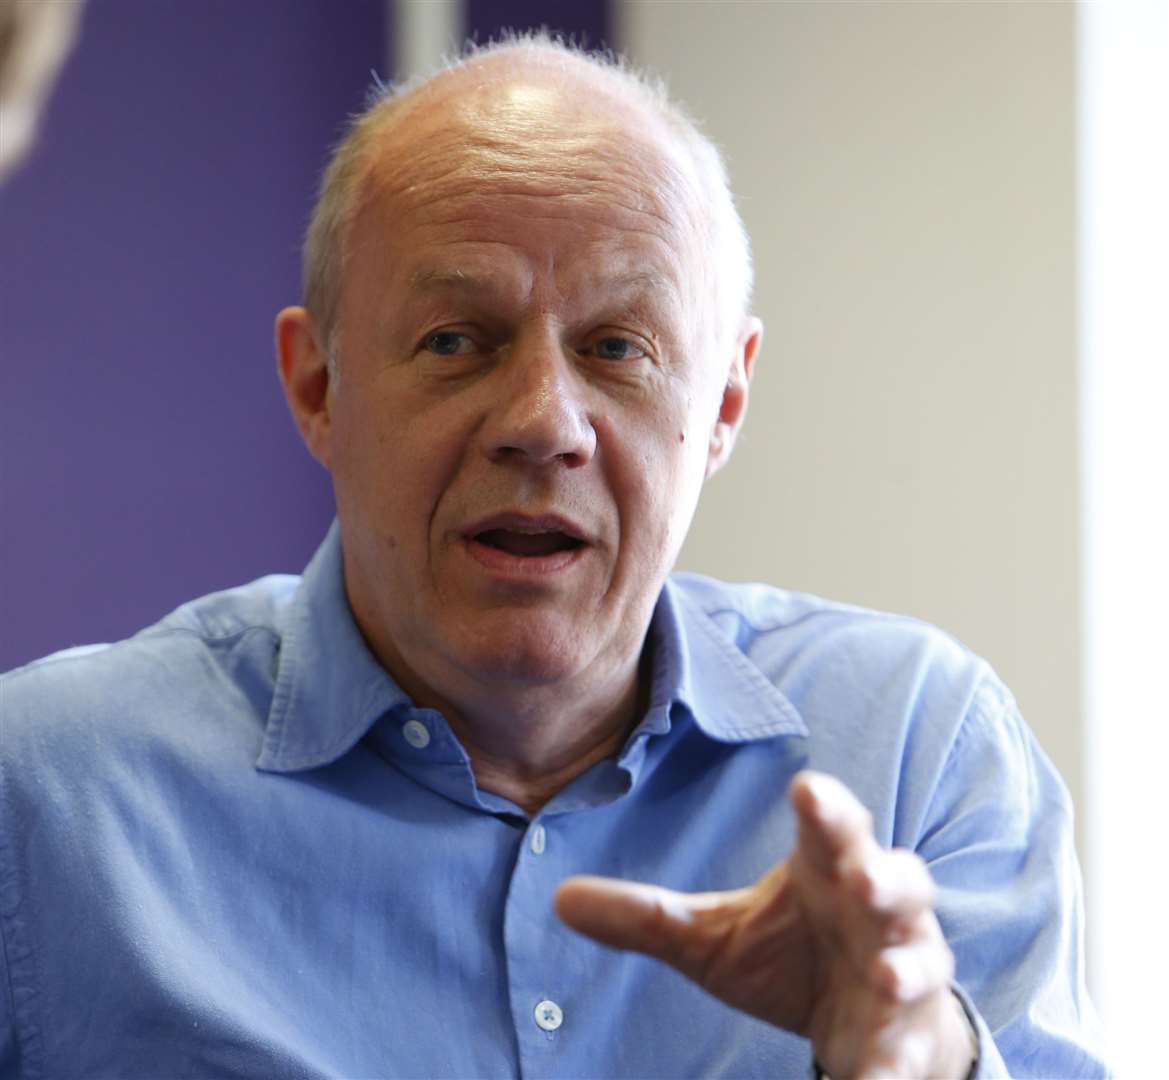 Damian Green believes people should be individually responsible in their actions to avoid an extended lockdown